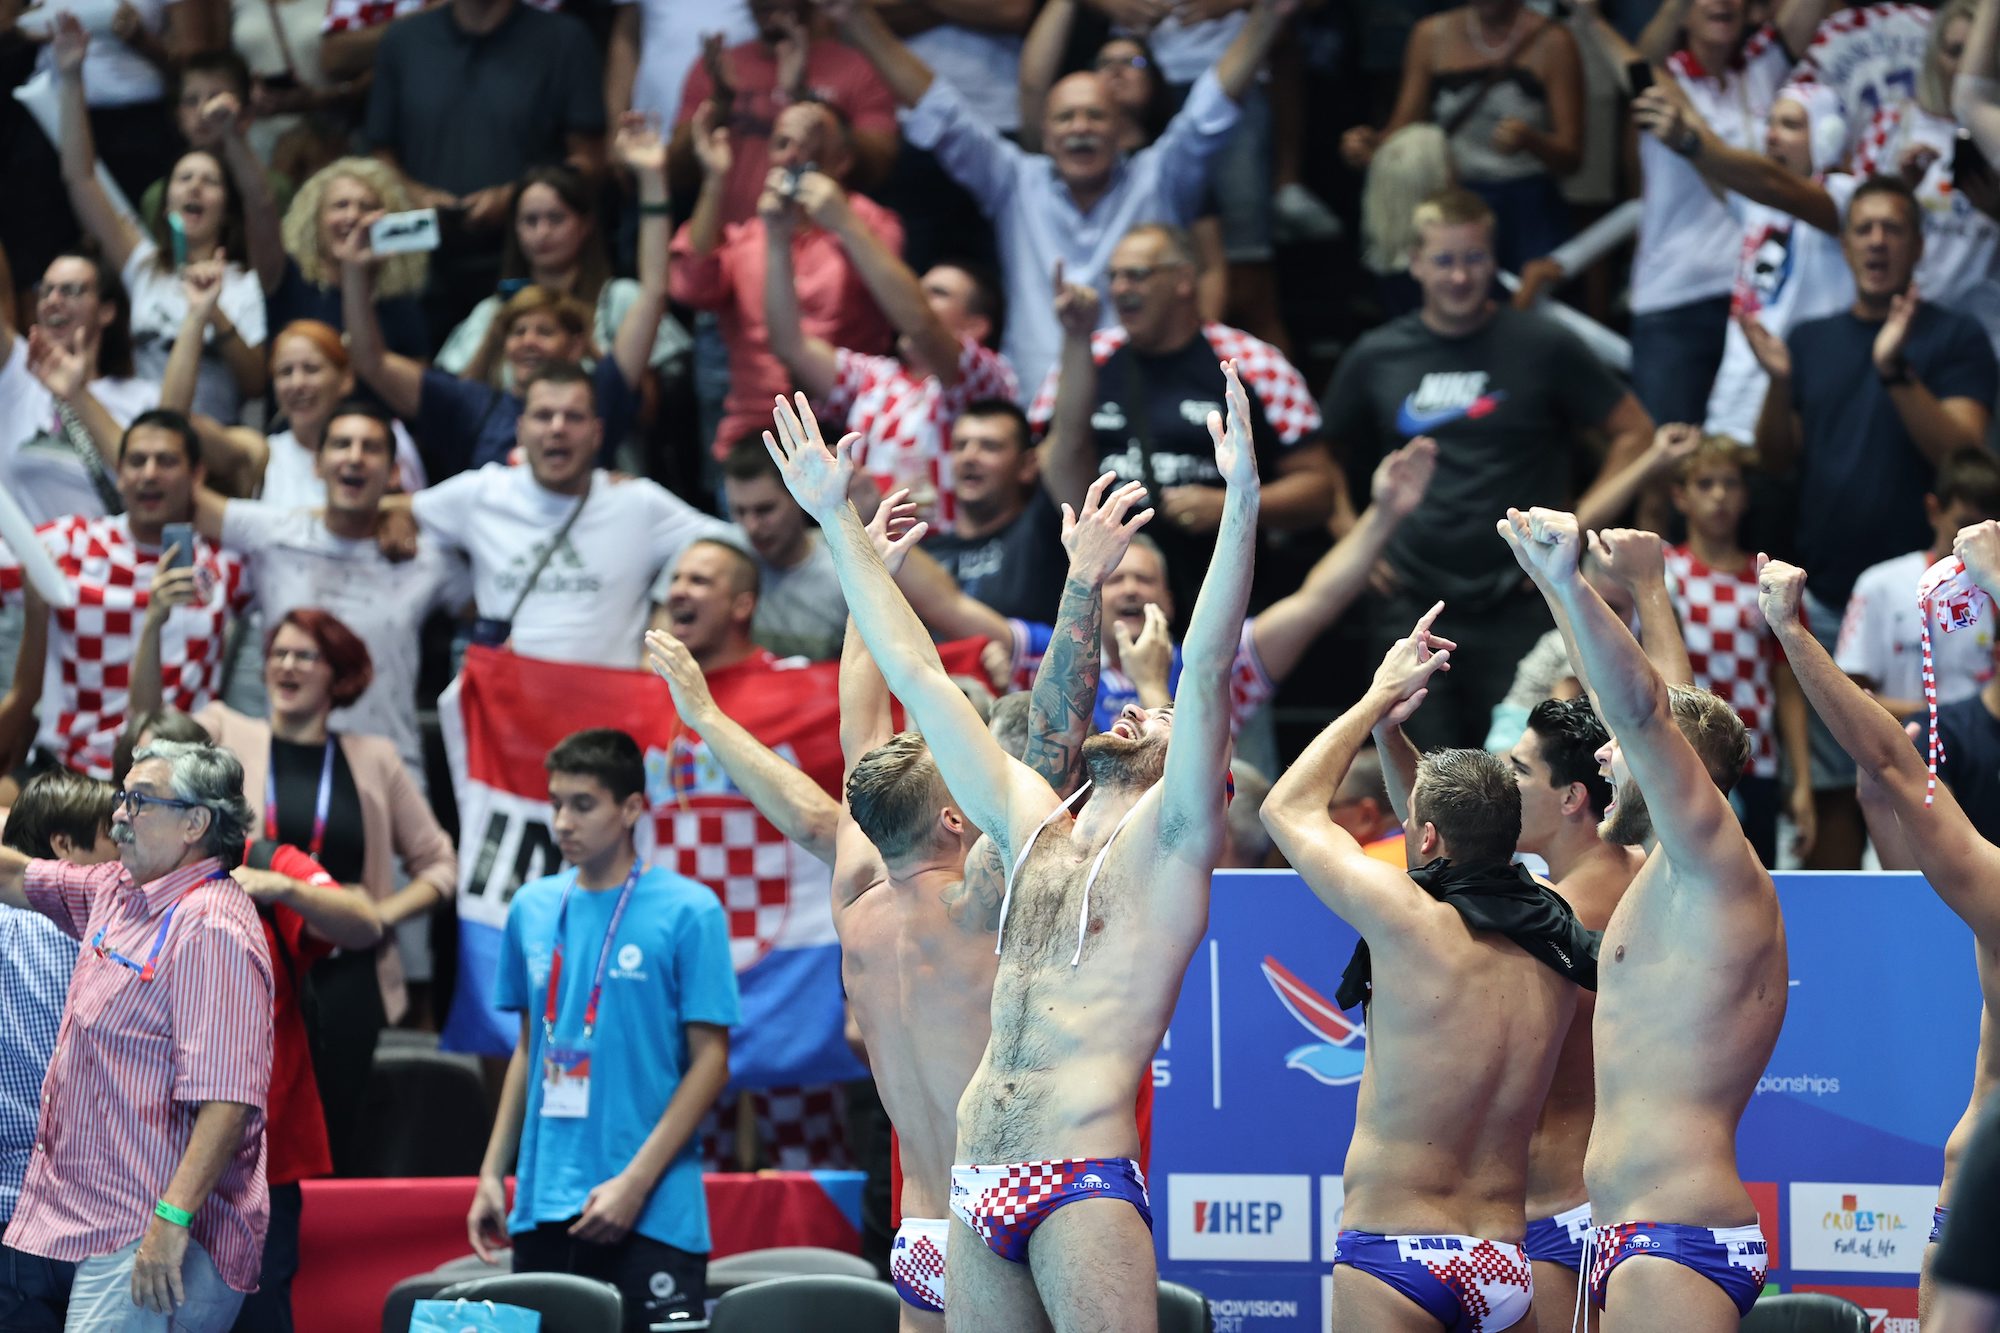 Amazing atmosphere in Split as Croatia set to play for water polo gold 